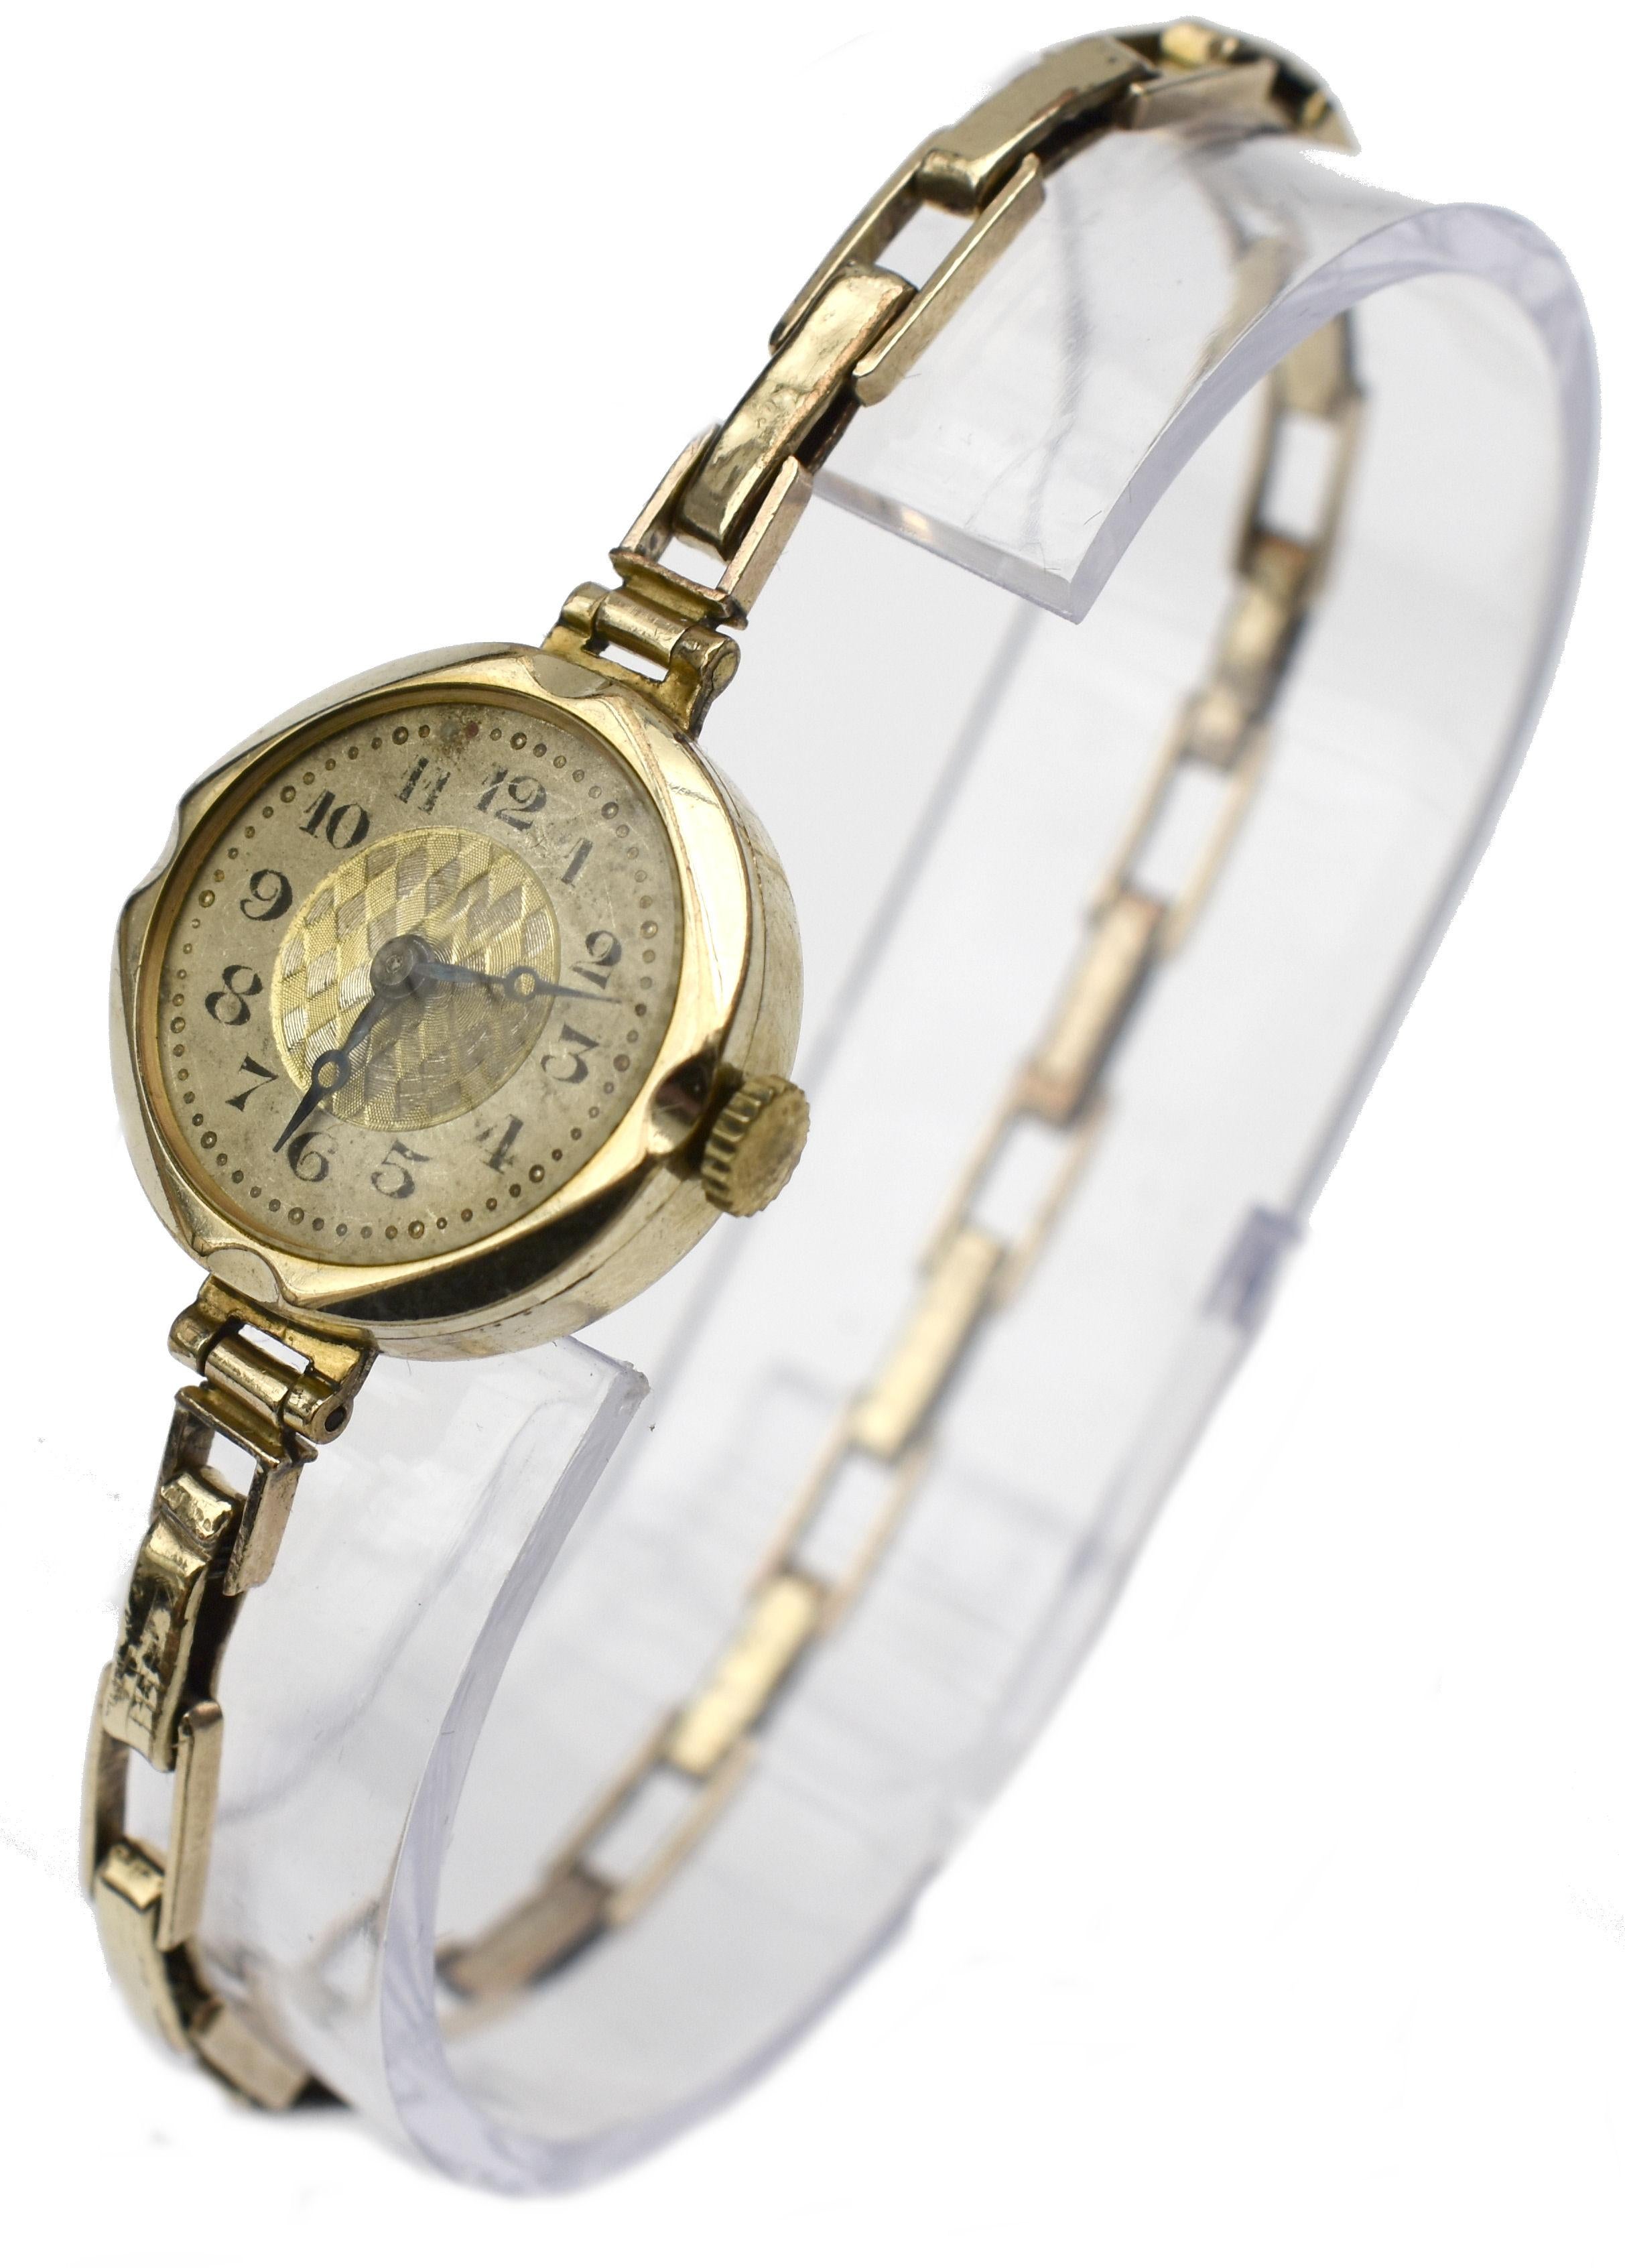 For your consideration is this beautiful ladies Art Deco c1920s Rolled Gold Harlequin Dial 15 Jewels mechanical manual wind wrist watch. Fully serviced and keeping excellent time this watch also boasts being cosmetically great condition and free